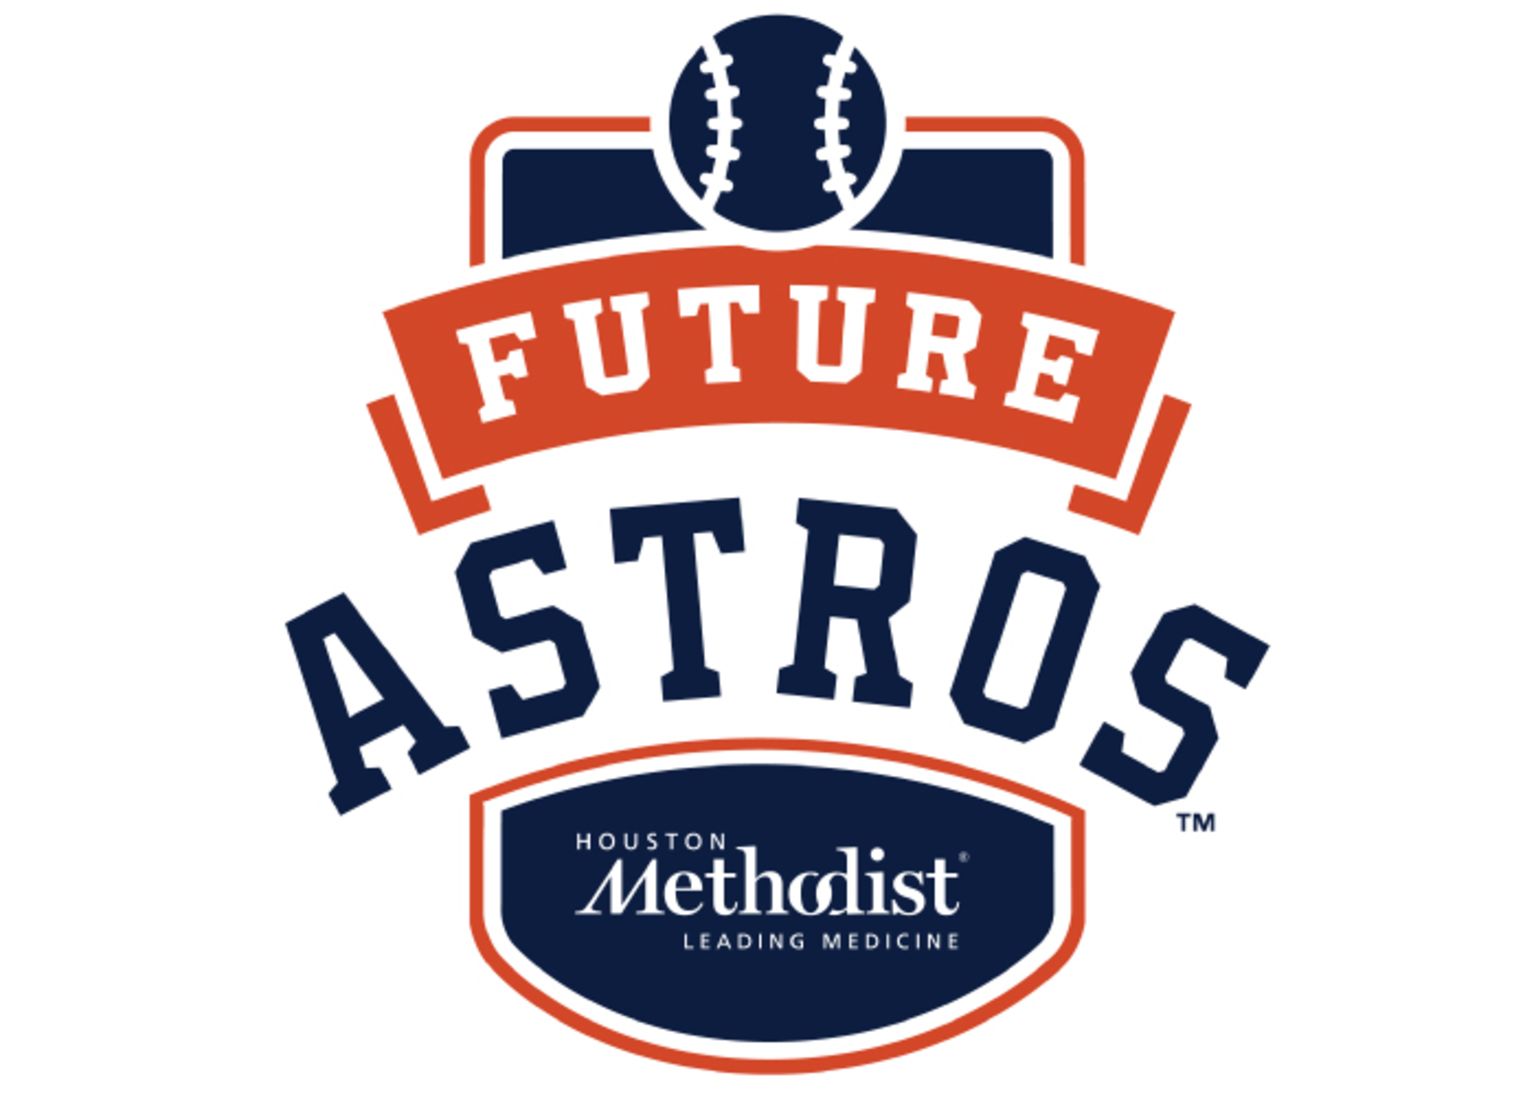 Houston Astros on X: This weekend, Pasadena Peewee League celebrated their  #OpeningDay as part of the Future Astros program. Thanks to @methodisthosp,  they'll rep the Astros as part of this year's jersey